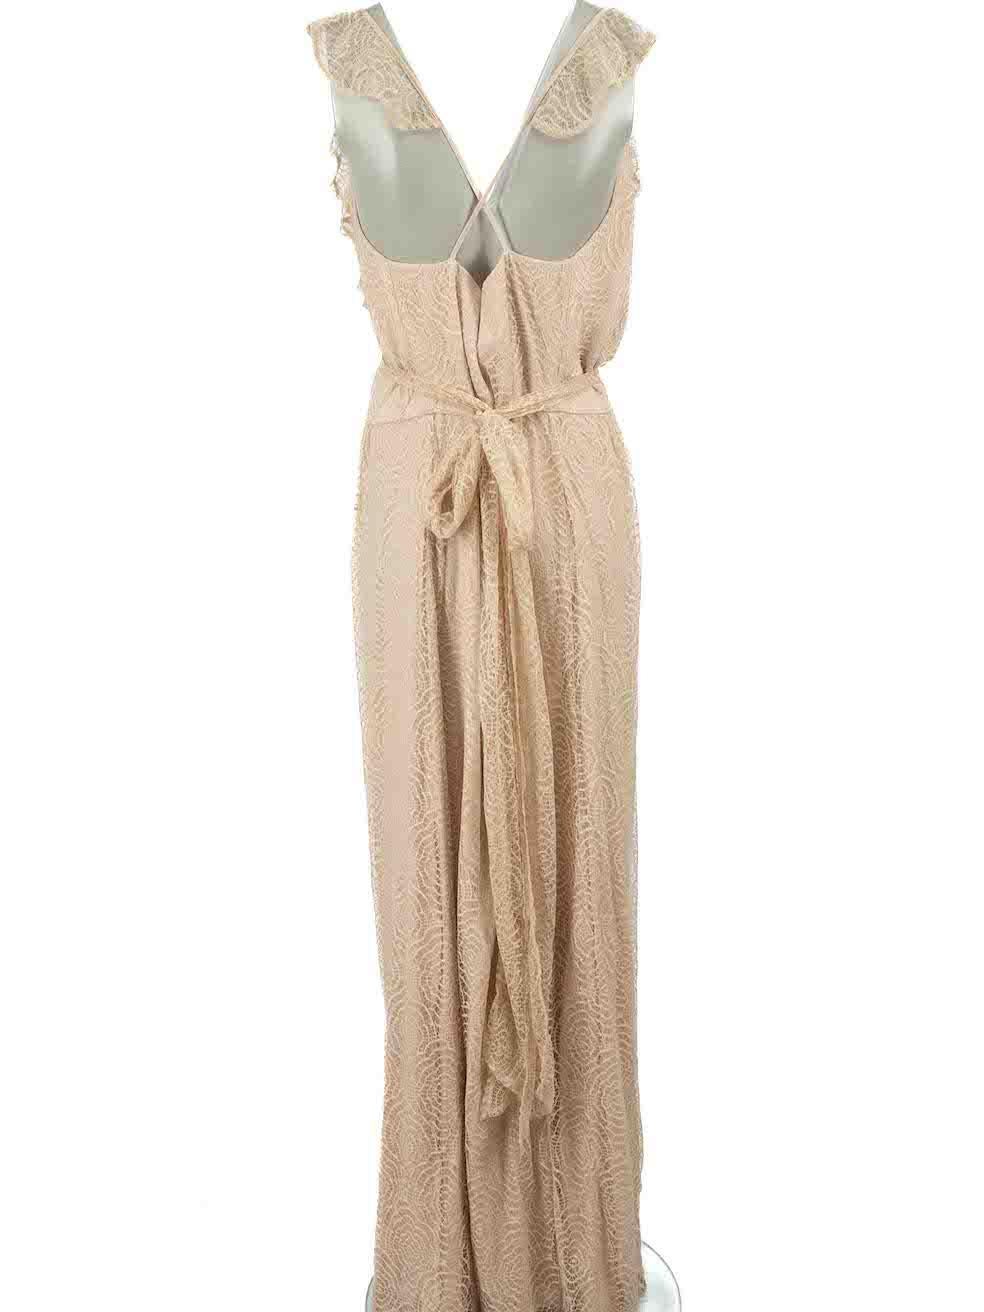 Joanna August Ceremony by Joanna August Beige Lace Wrap Dress Size M In Excellent Condition For Sale In London, GB